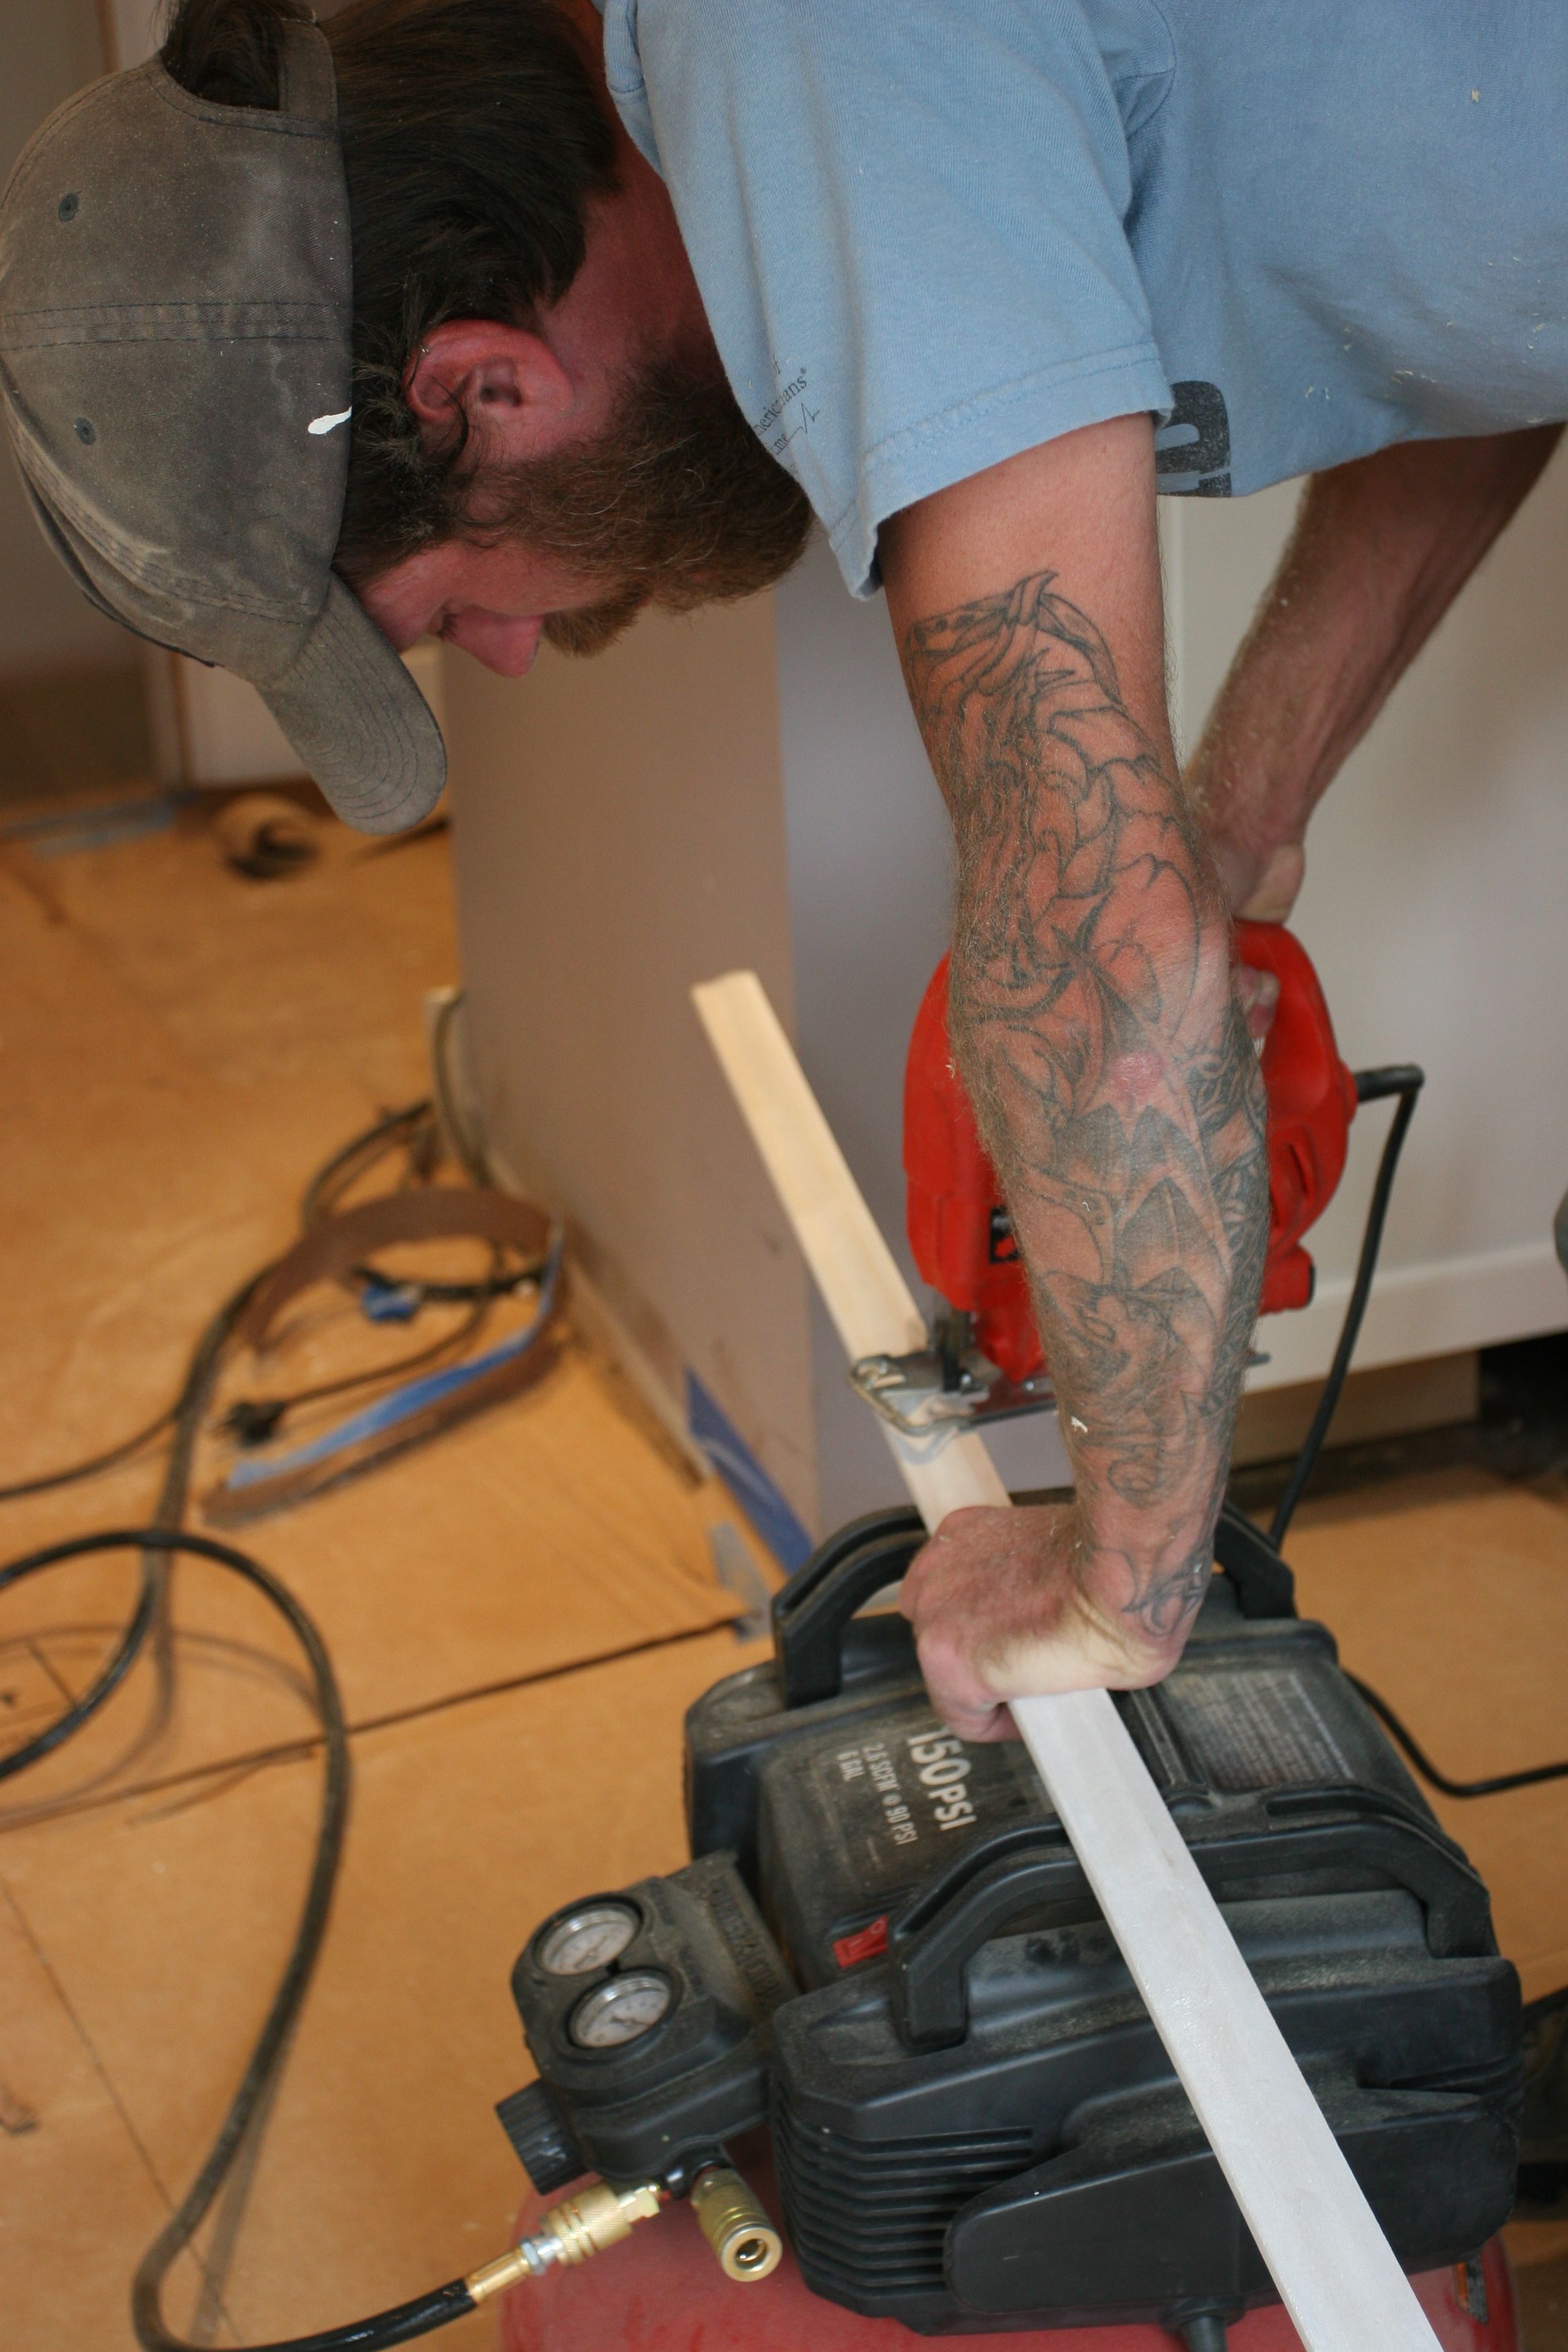 Eric jigsawing some baseboard trim to allow for the powder room water supply.